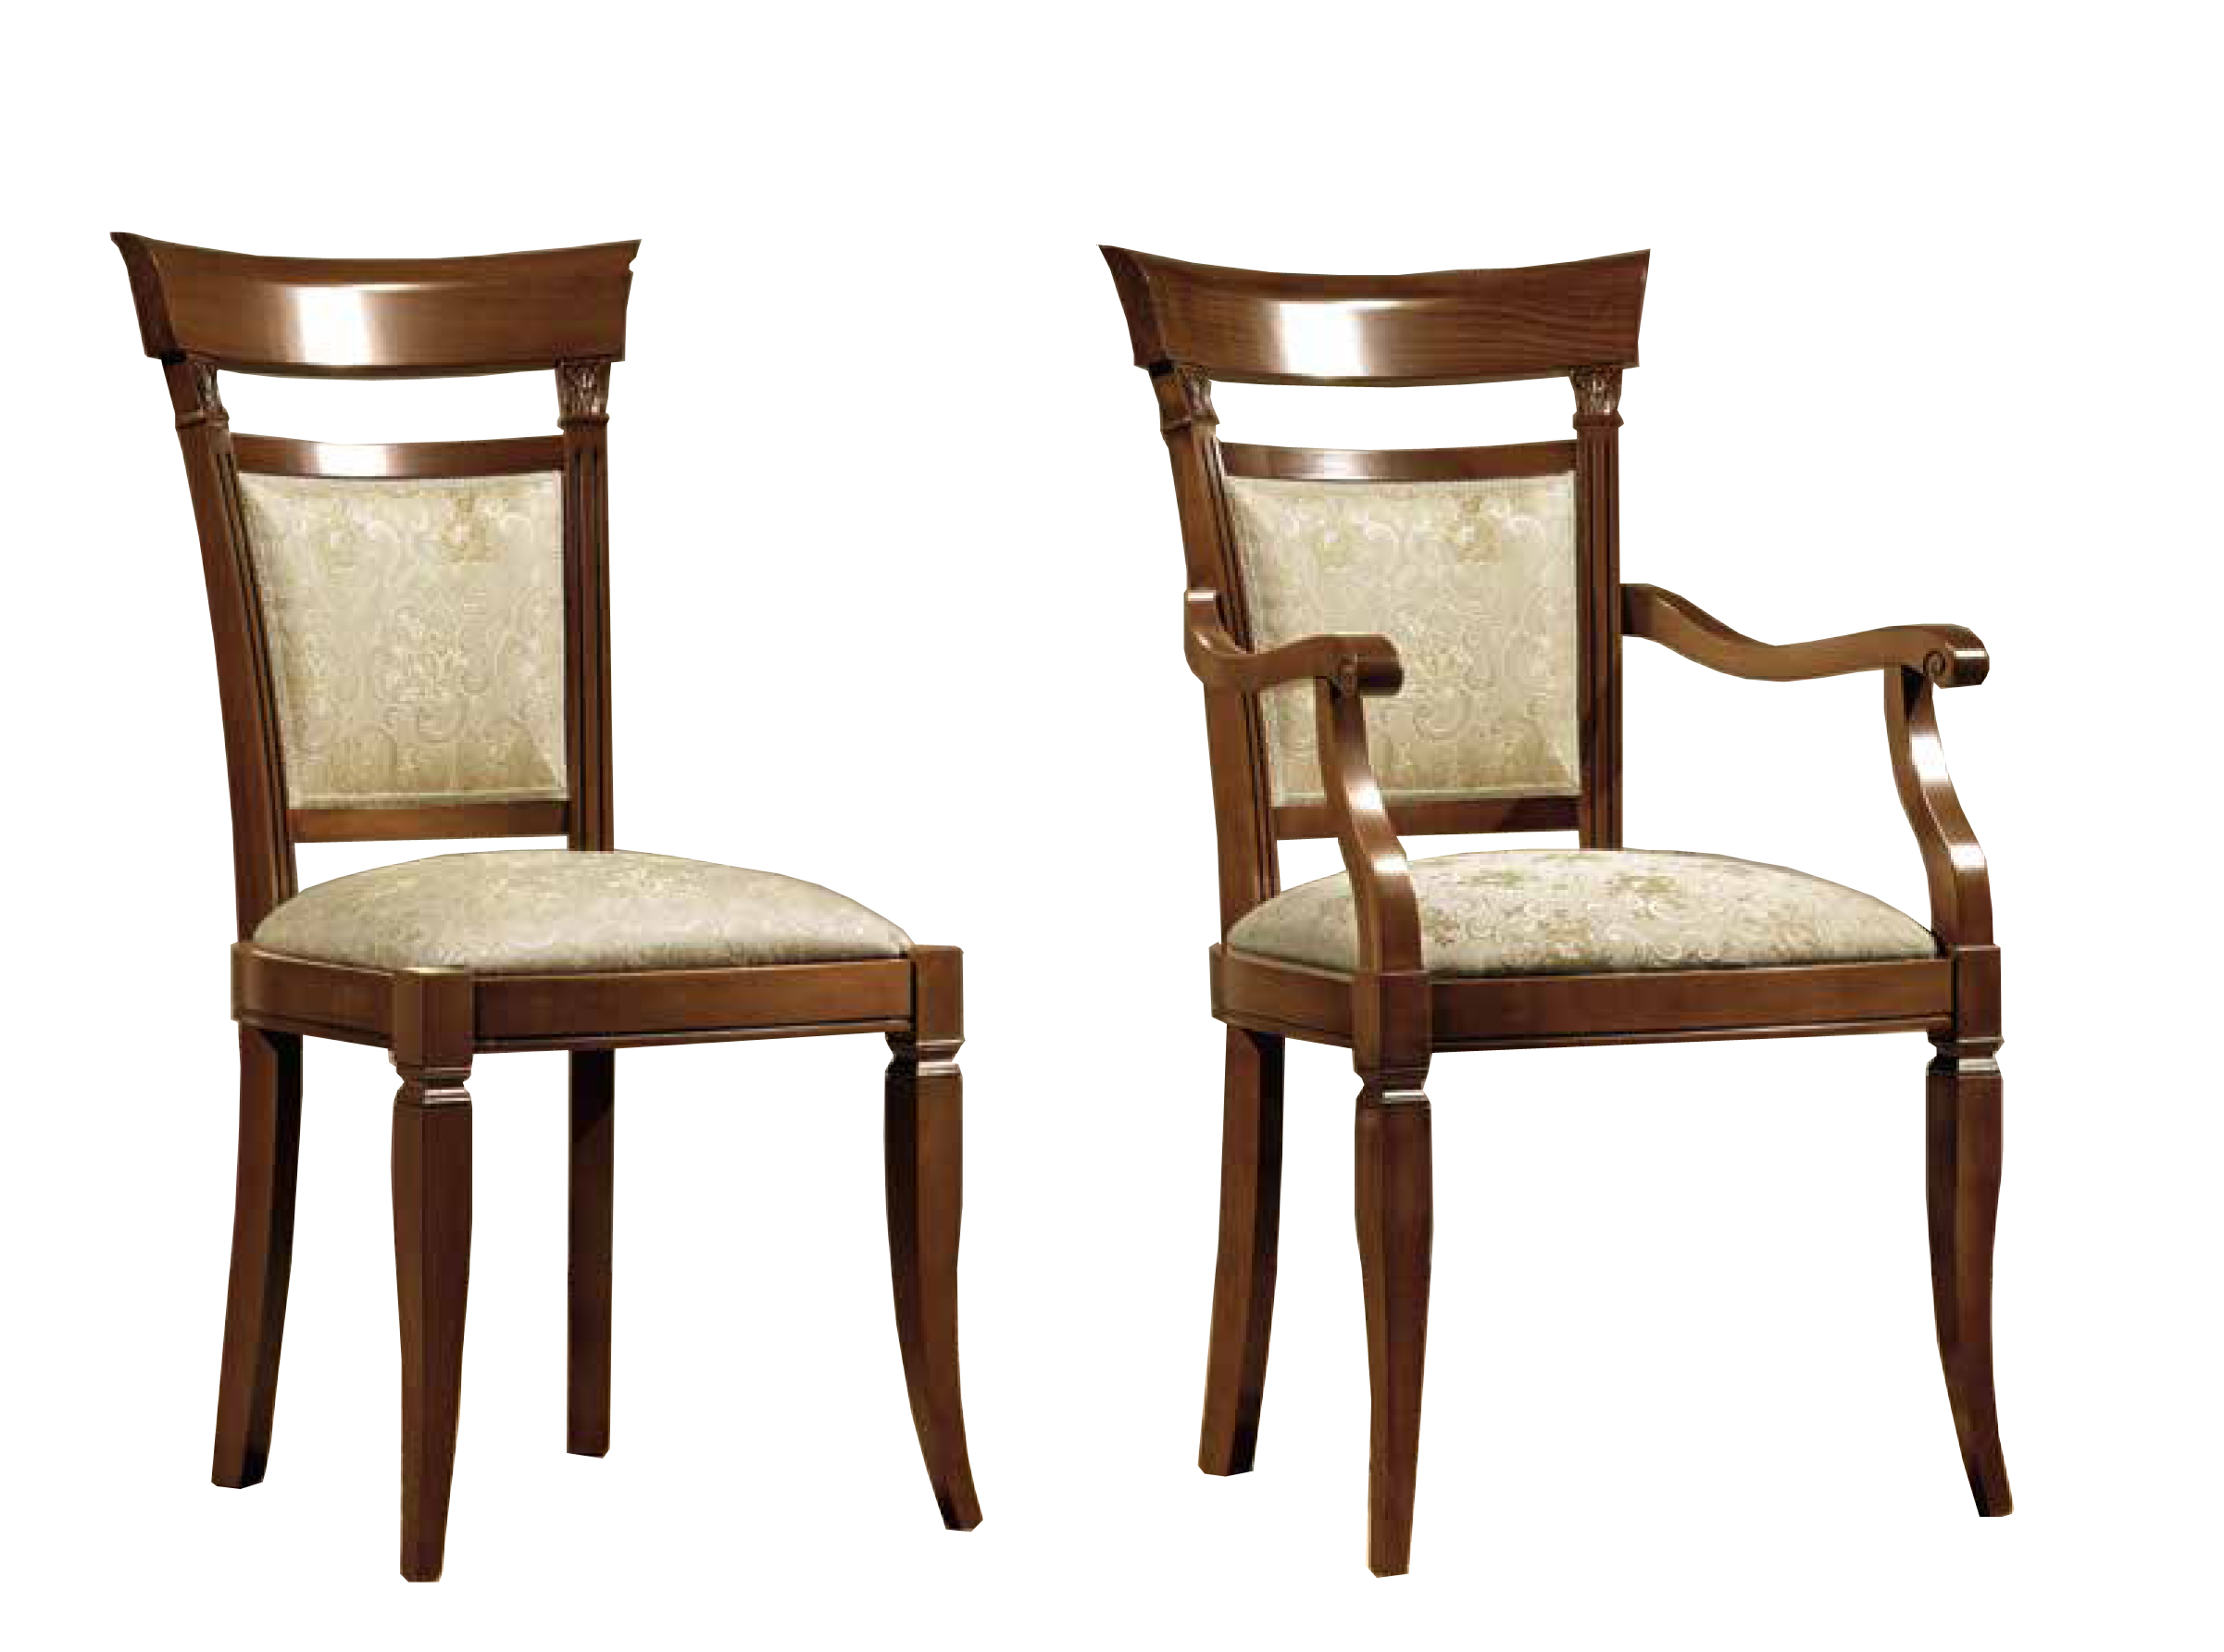 Brands Camel Gold Collection, Italy Treviso Chairs Cherry